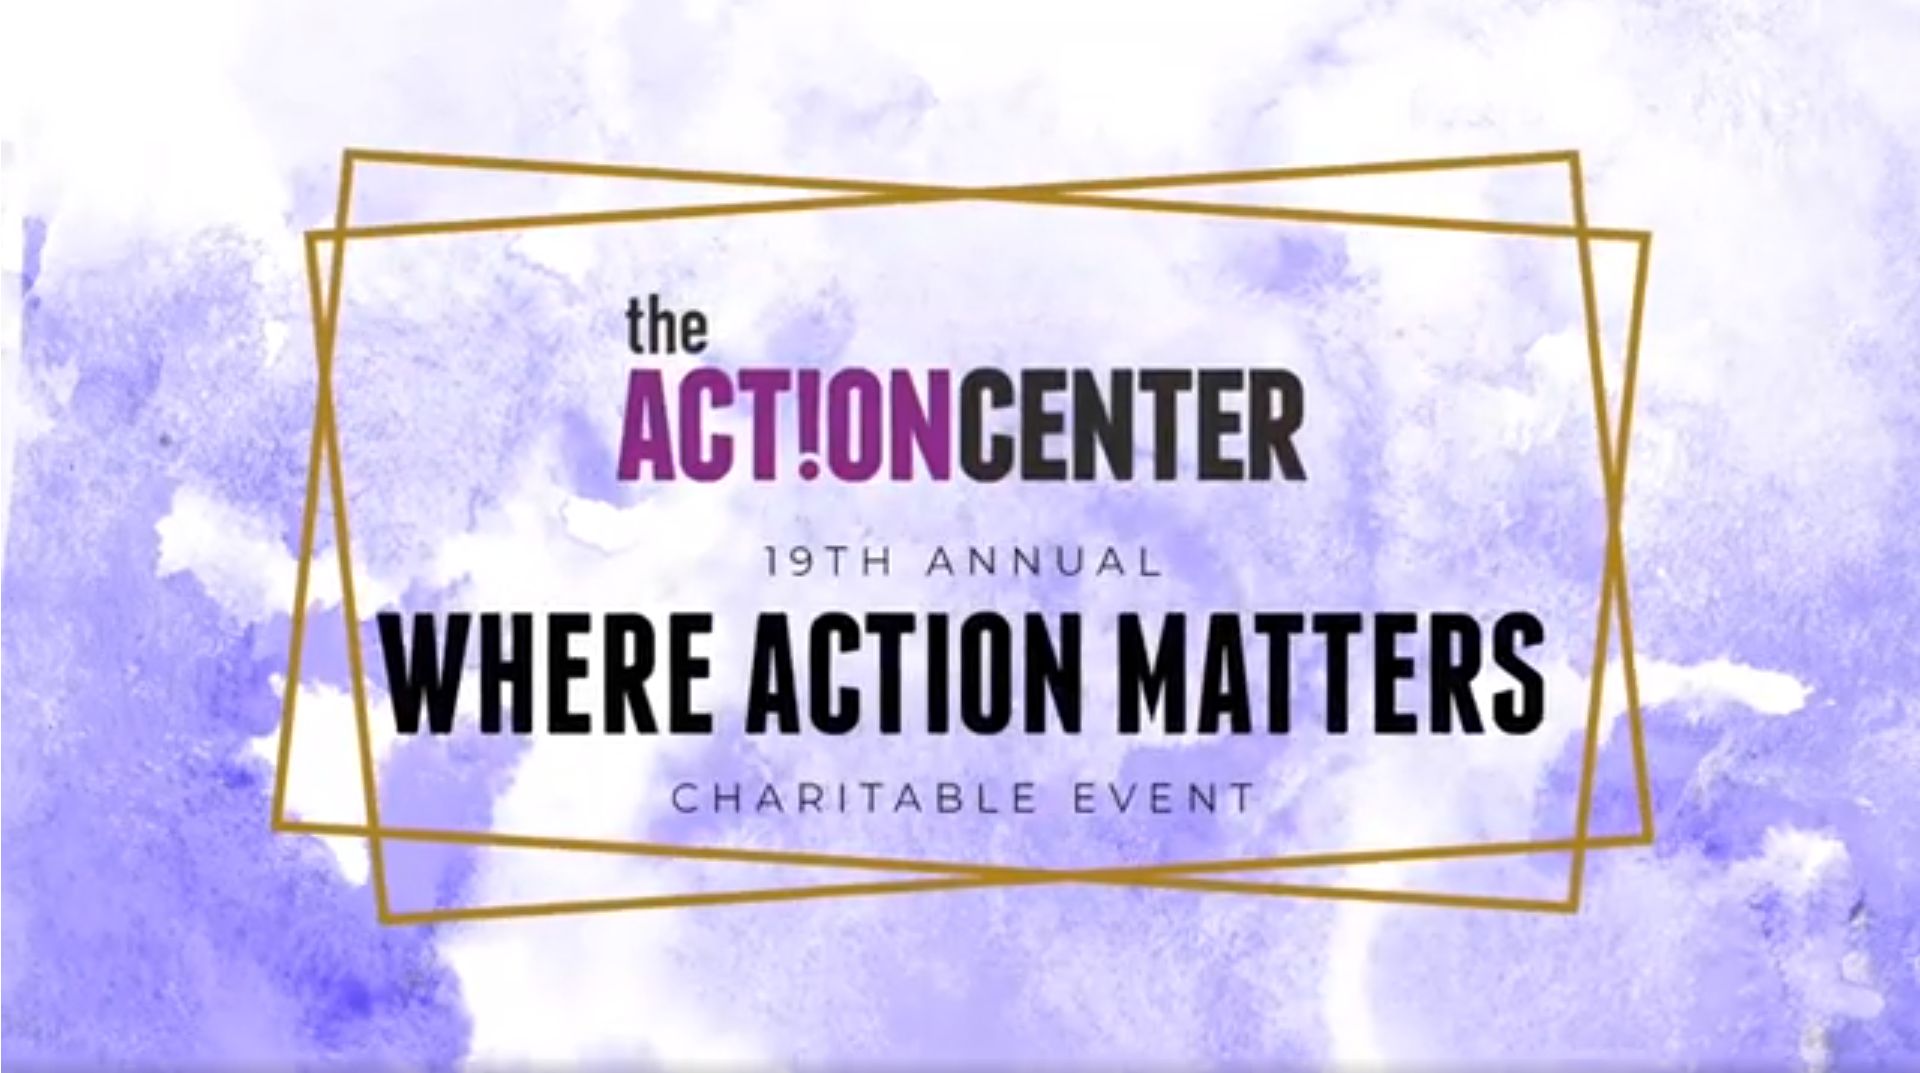 19th Annual Where Action Matters Charitable Event, Online Event